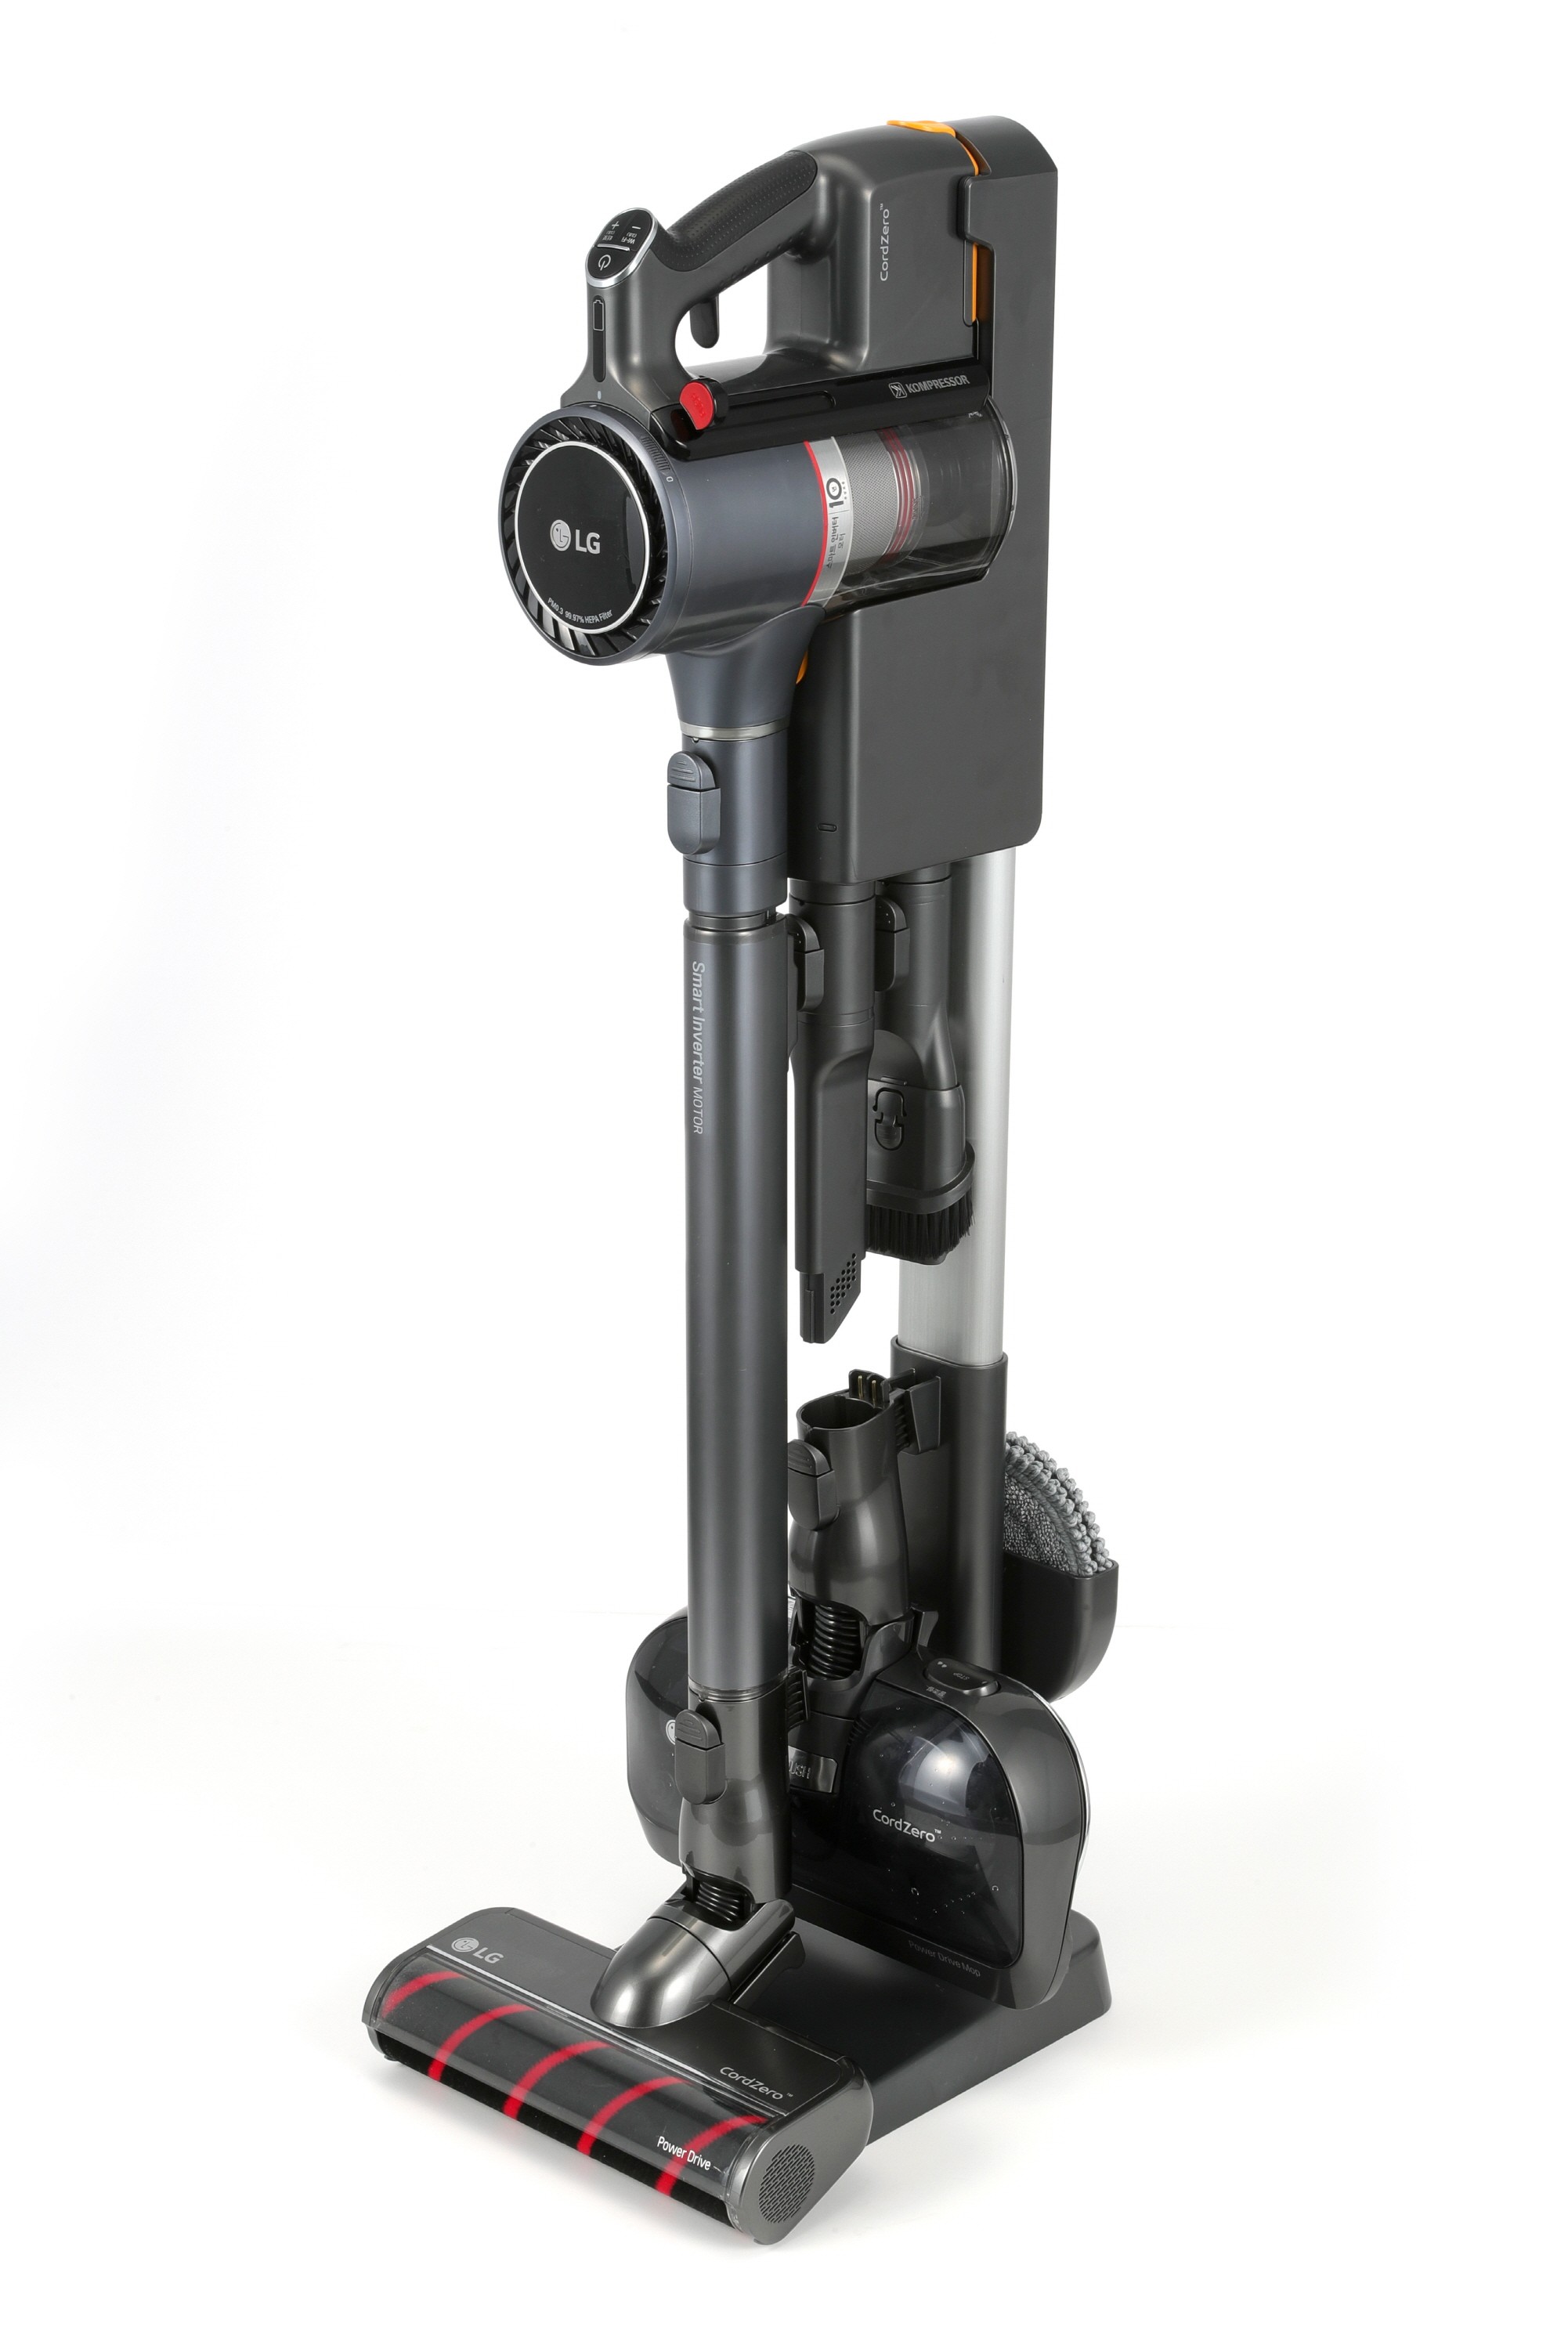 LG CordZeroThinQ A9 Stick Vacuum hooked up to its multi-type charging stand that provides space-efficient storage for the vacuum and its various nozzles and accessories.